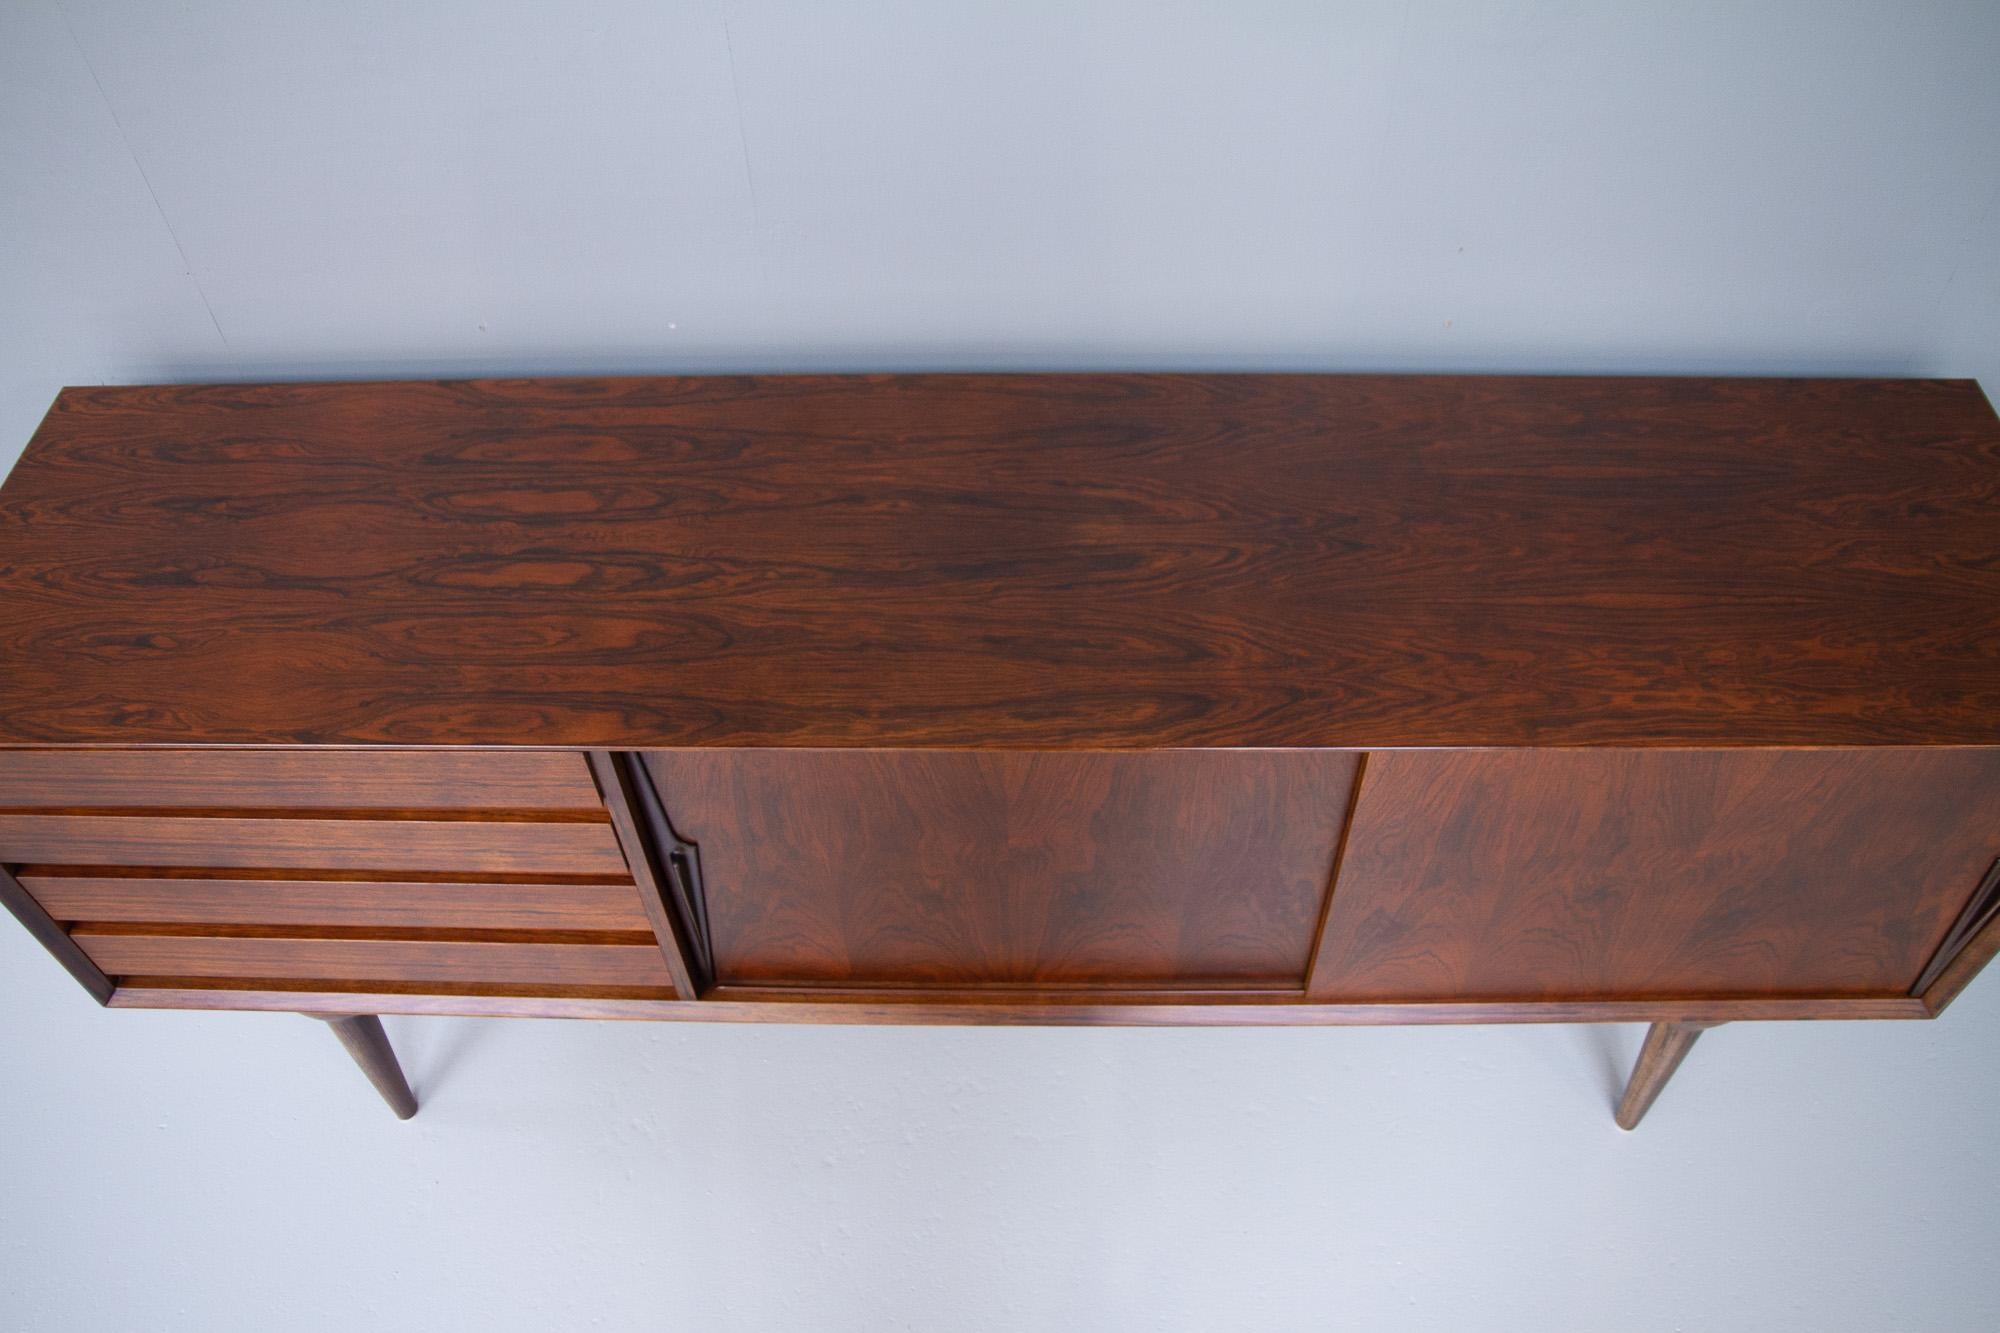 Vintage Danish Rosewood Sideboard Model 18 by Gunni Omann for Omann Jun. 1960s In Good Condition For Sale In Asaa, DK